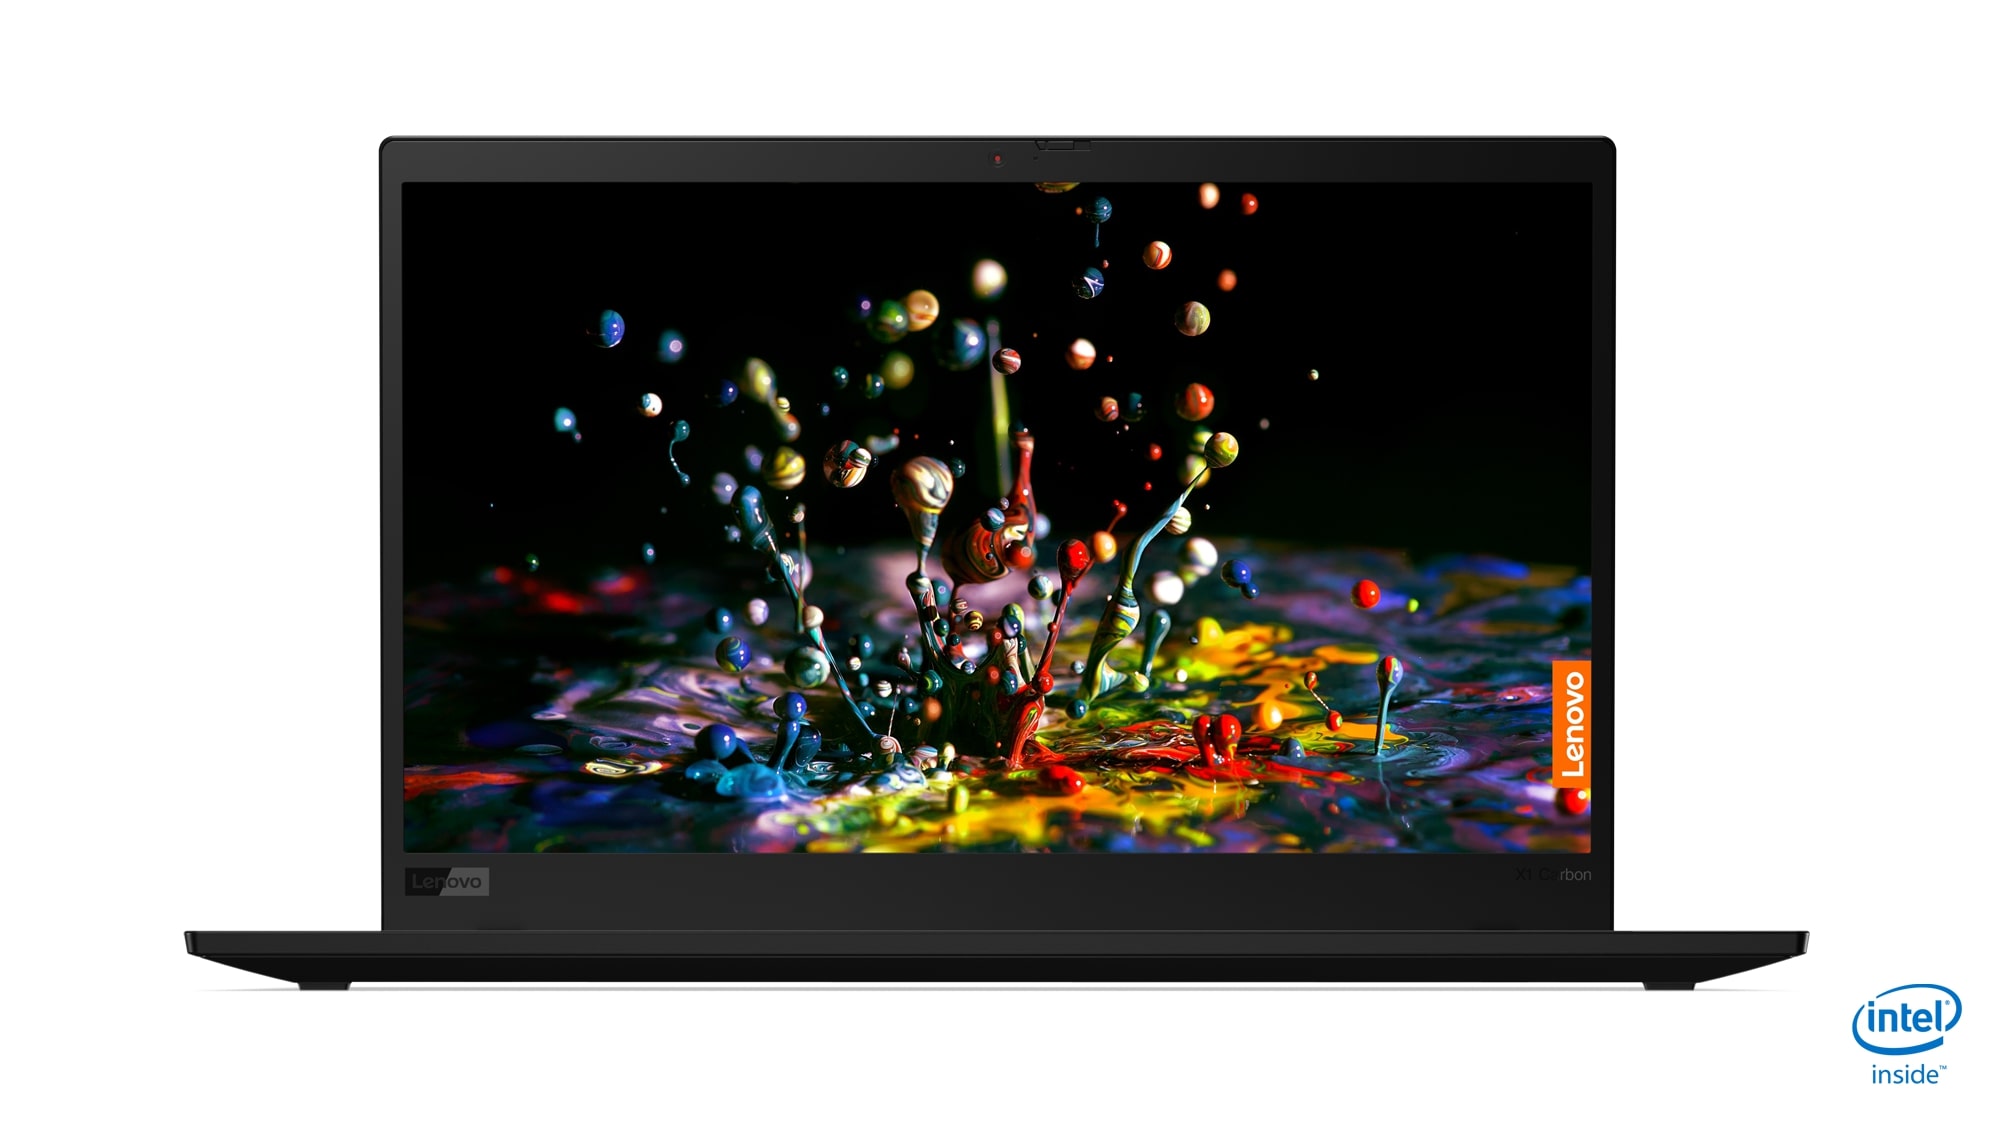 lenovo updated thinkpad x1 carbon yoga ces 2019 01 hero front facing